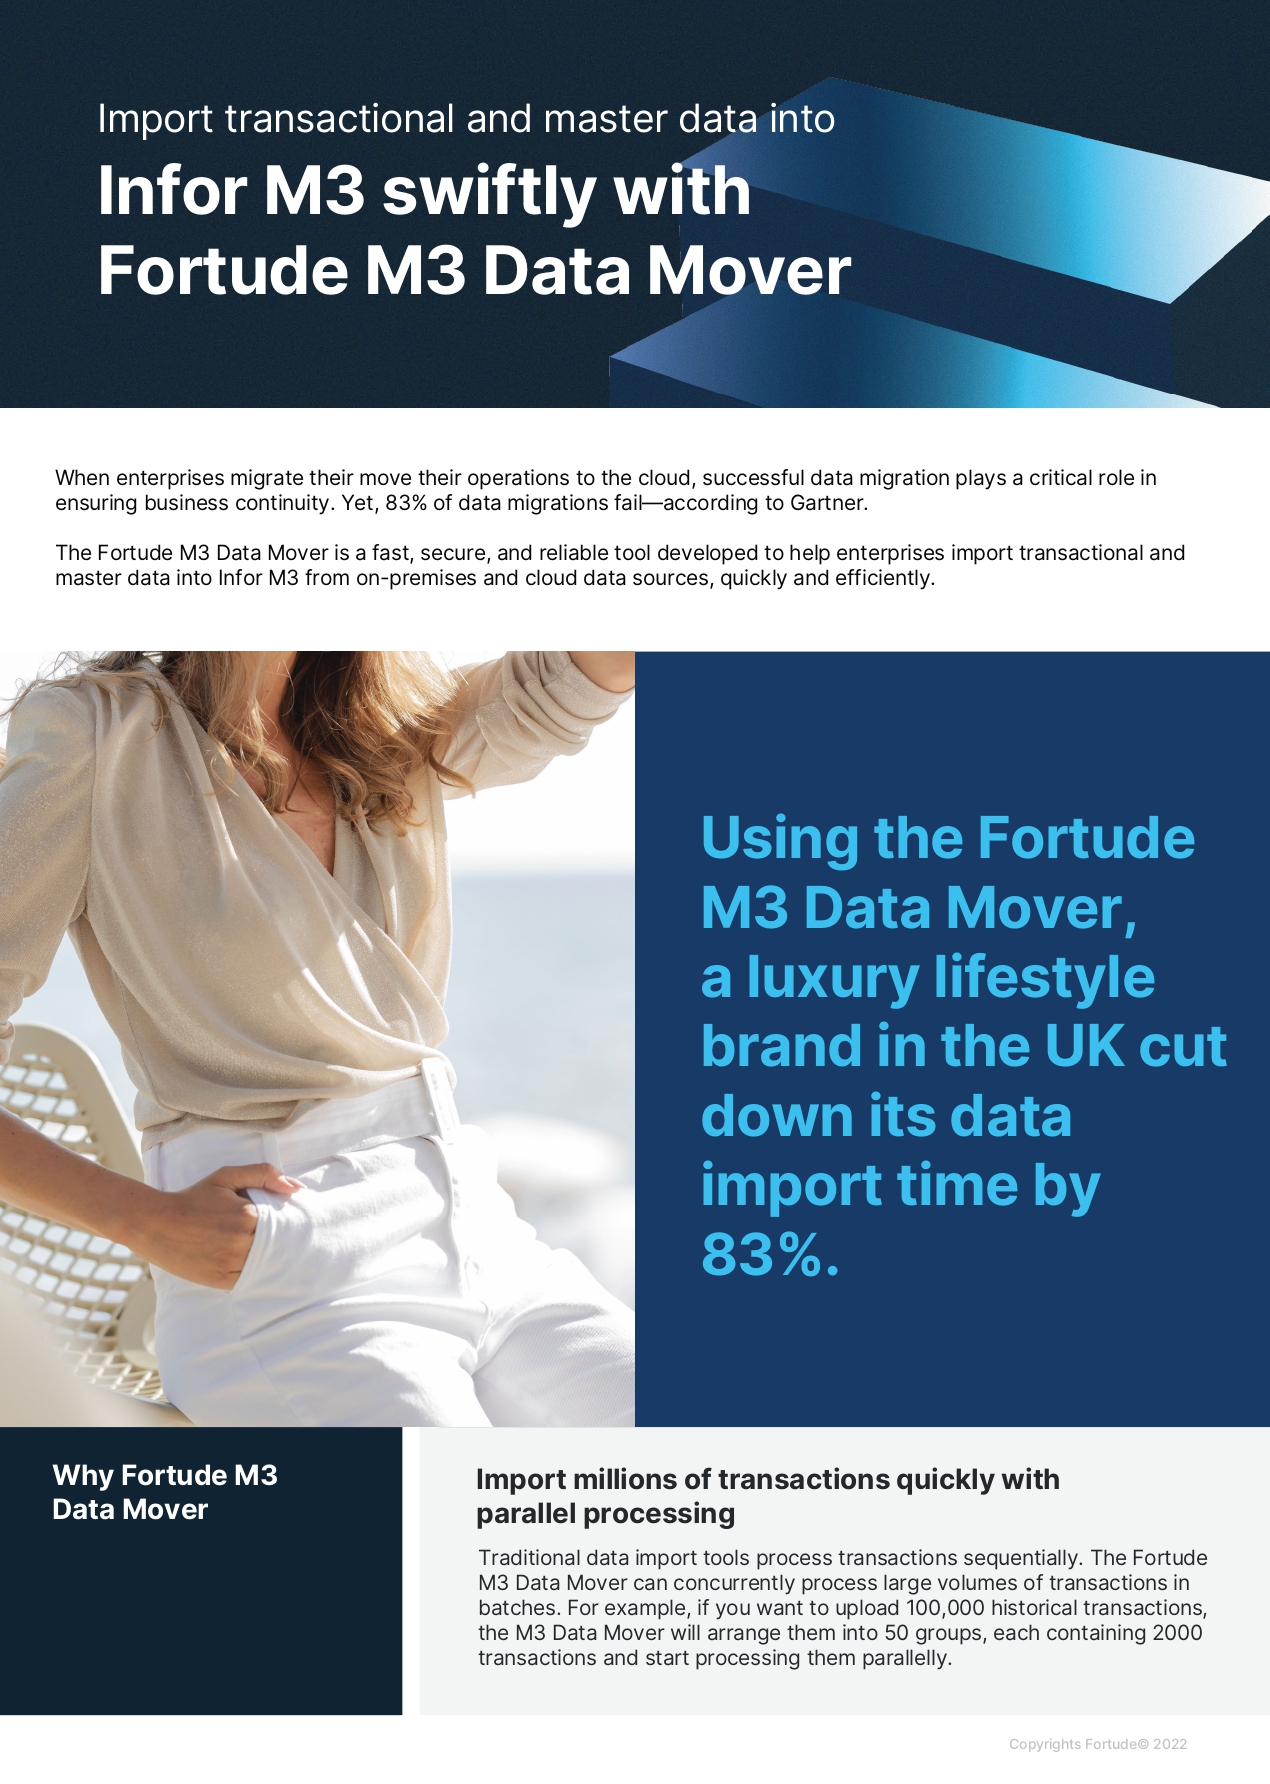 Fortude M3 Data Mover